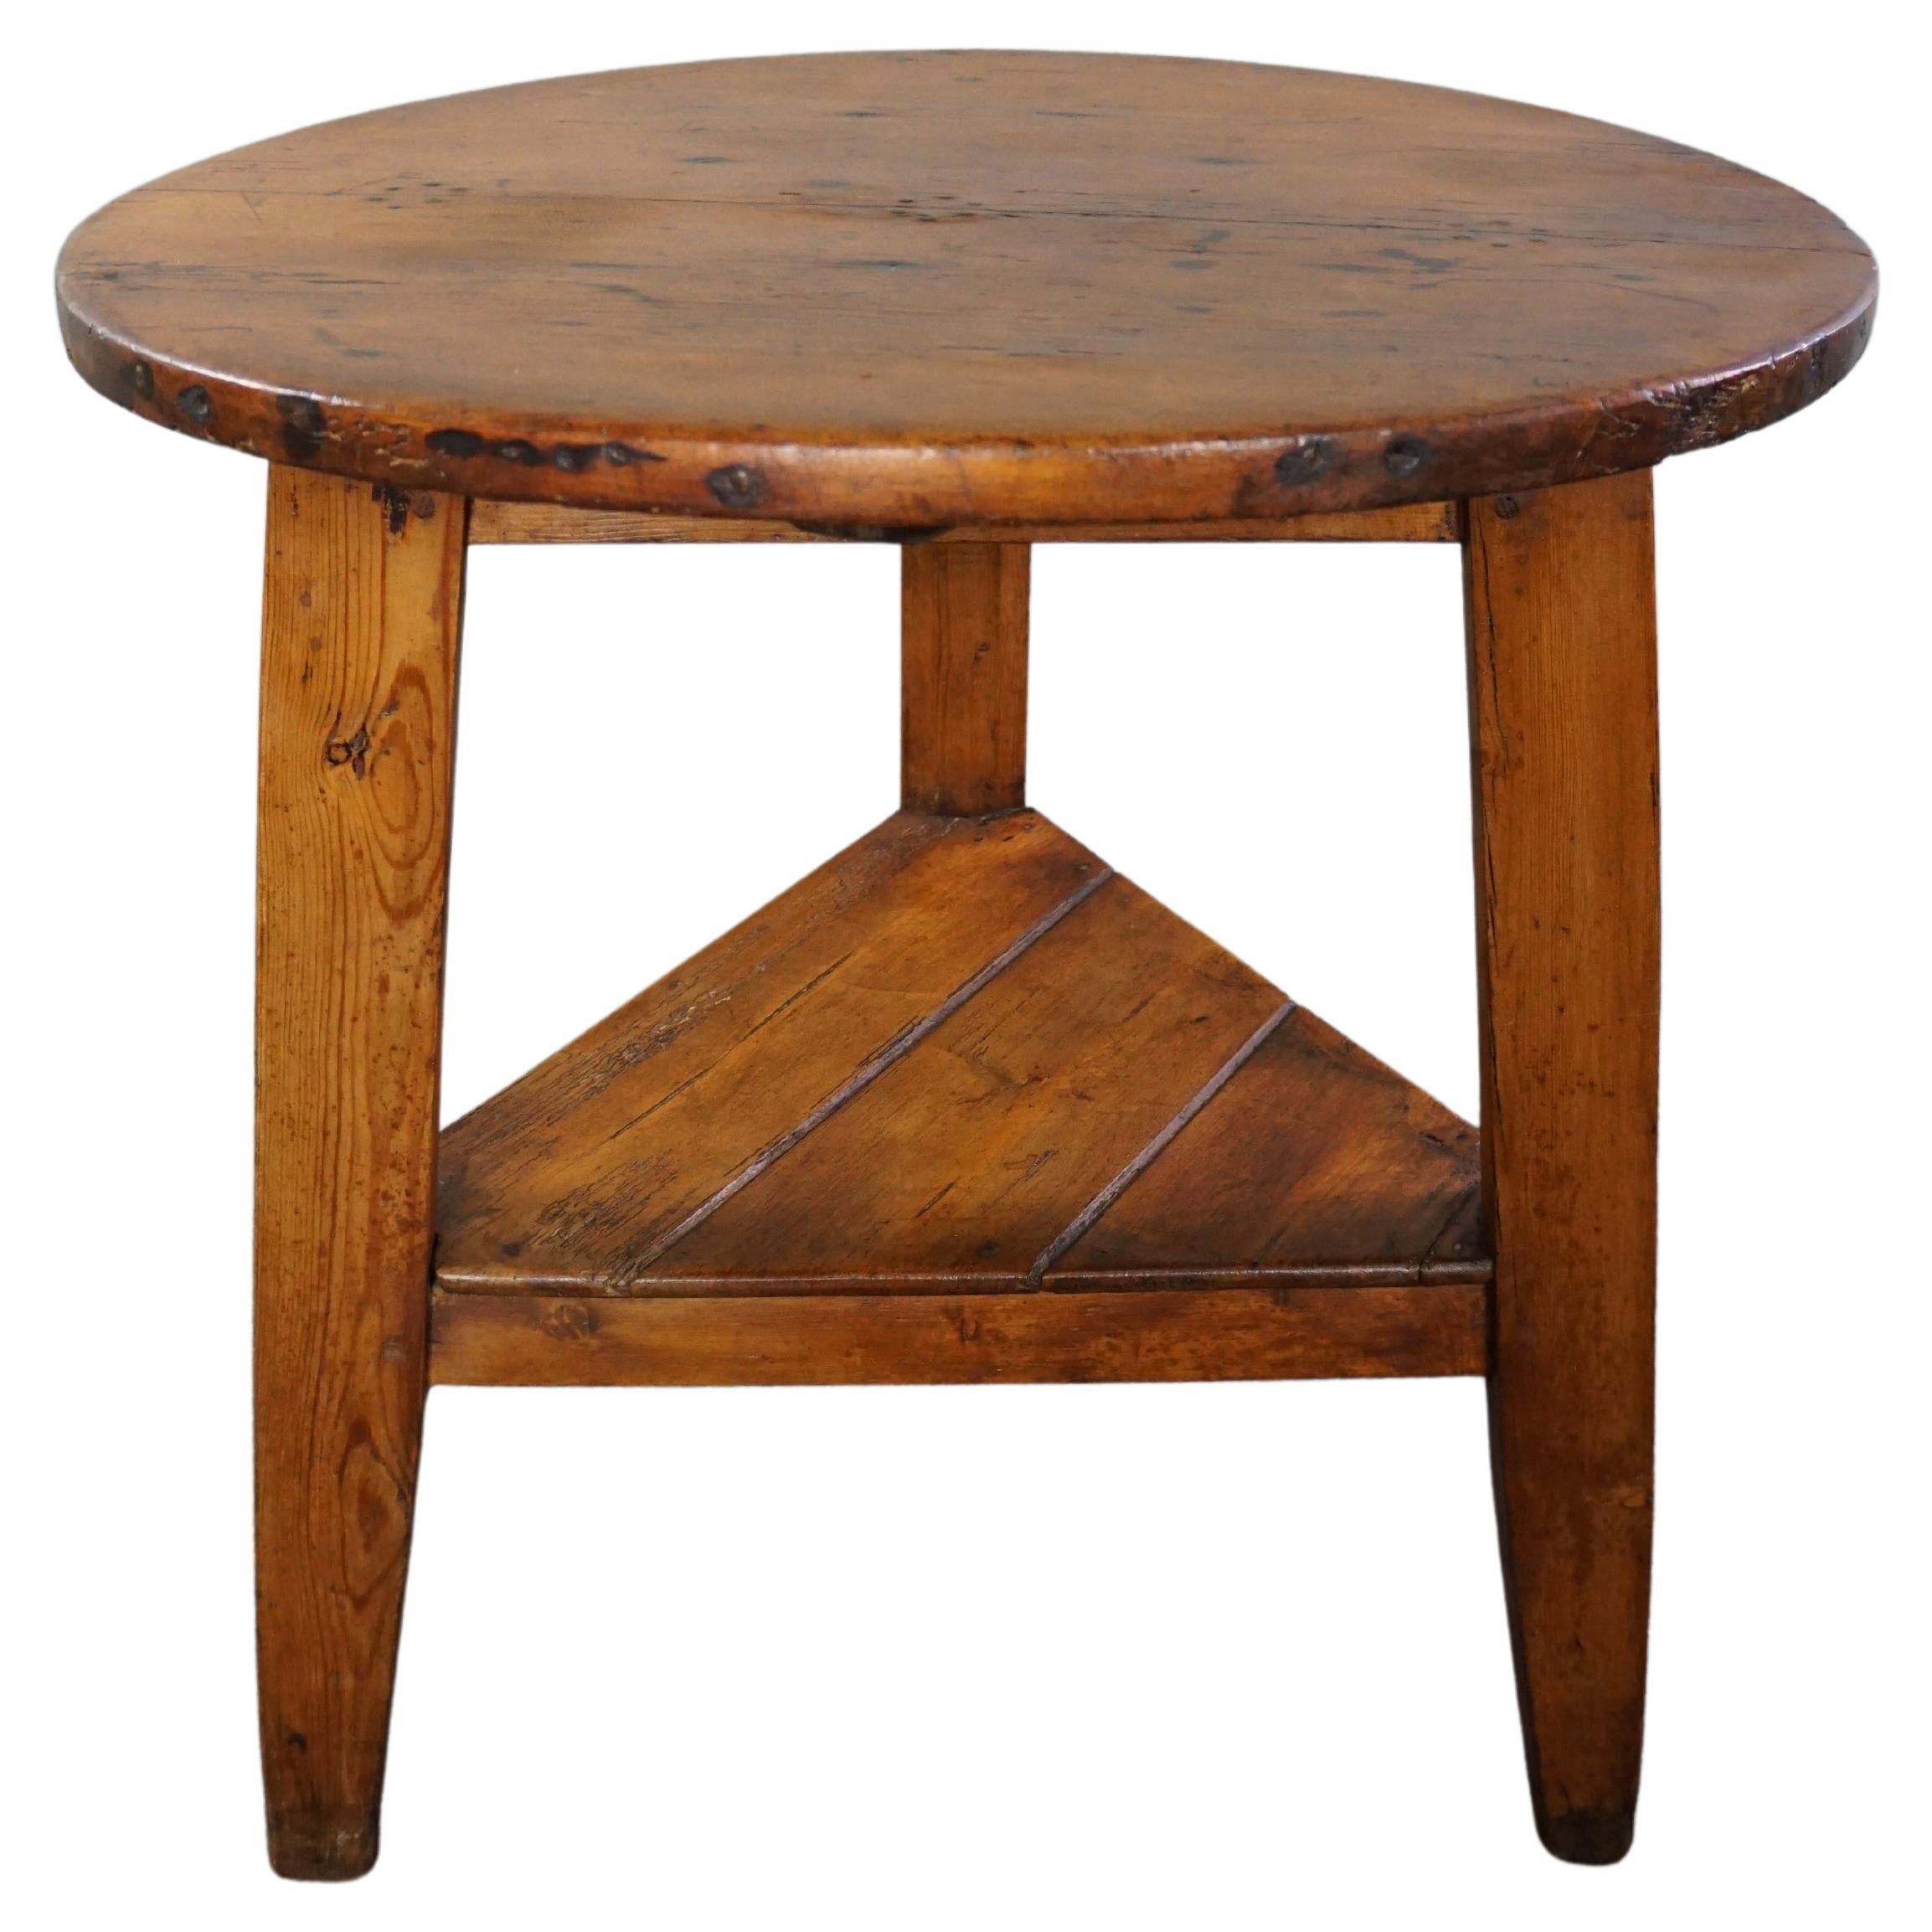 Beautiful tall early 19th-century English pinewood cricket table with original n